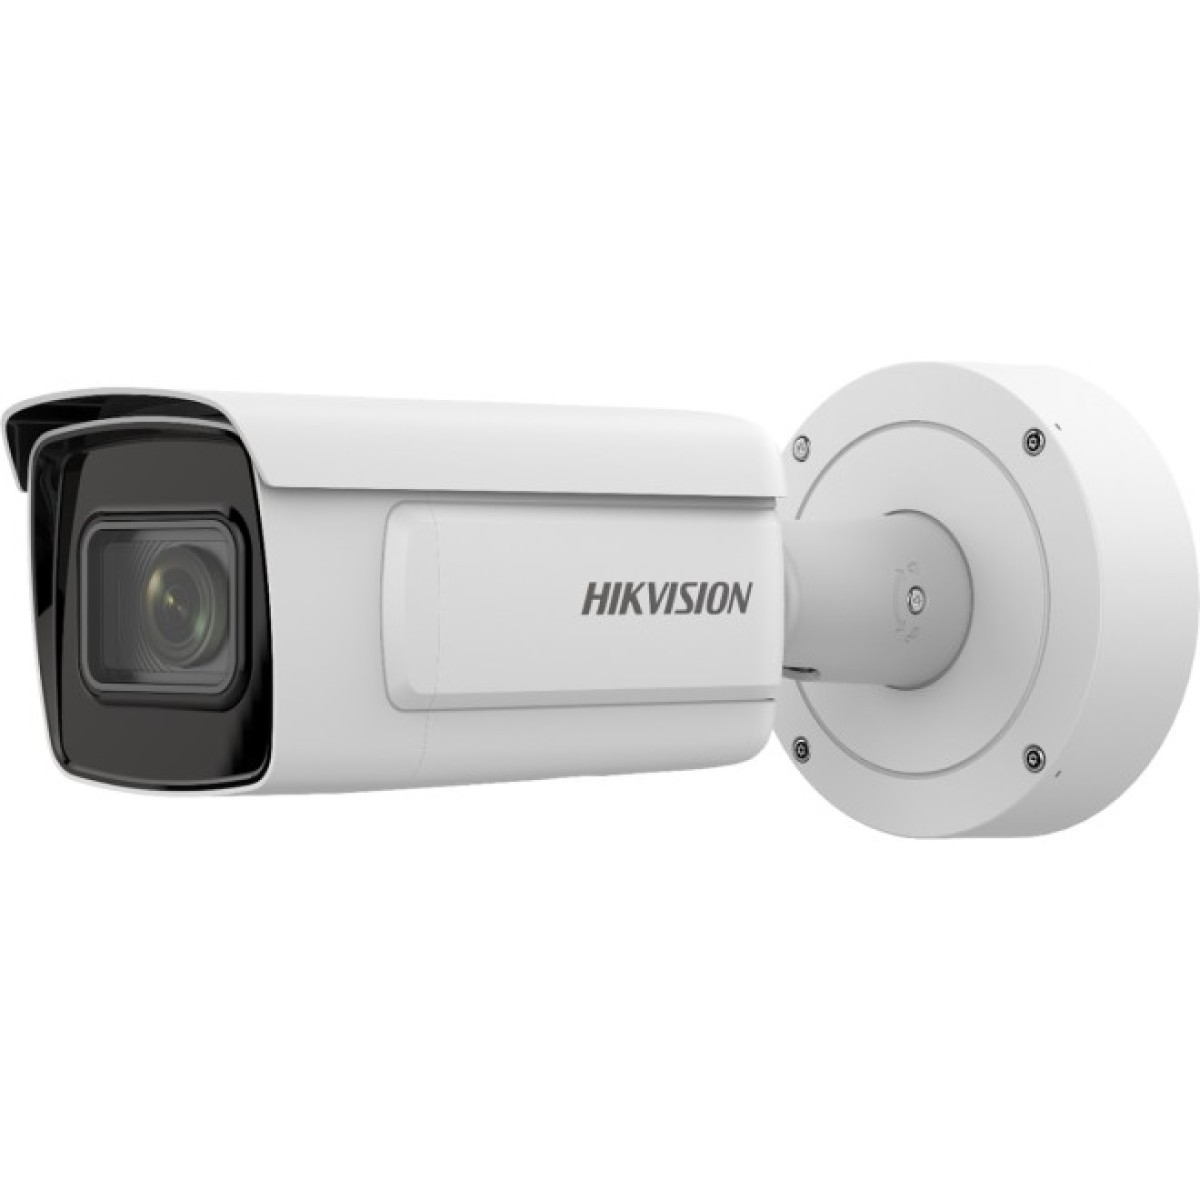 IP-камера Hikvision DS-2CD7A26G0-IZHS (8-32) 98_98.jpg - фото 1